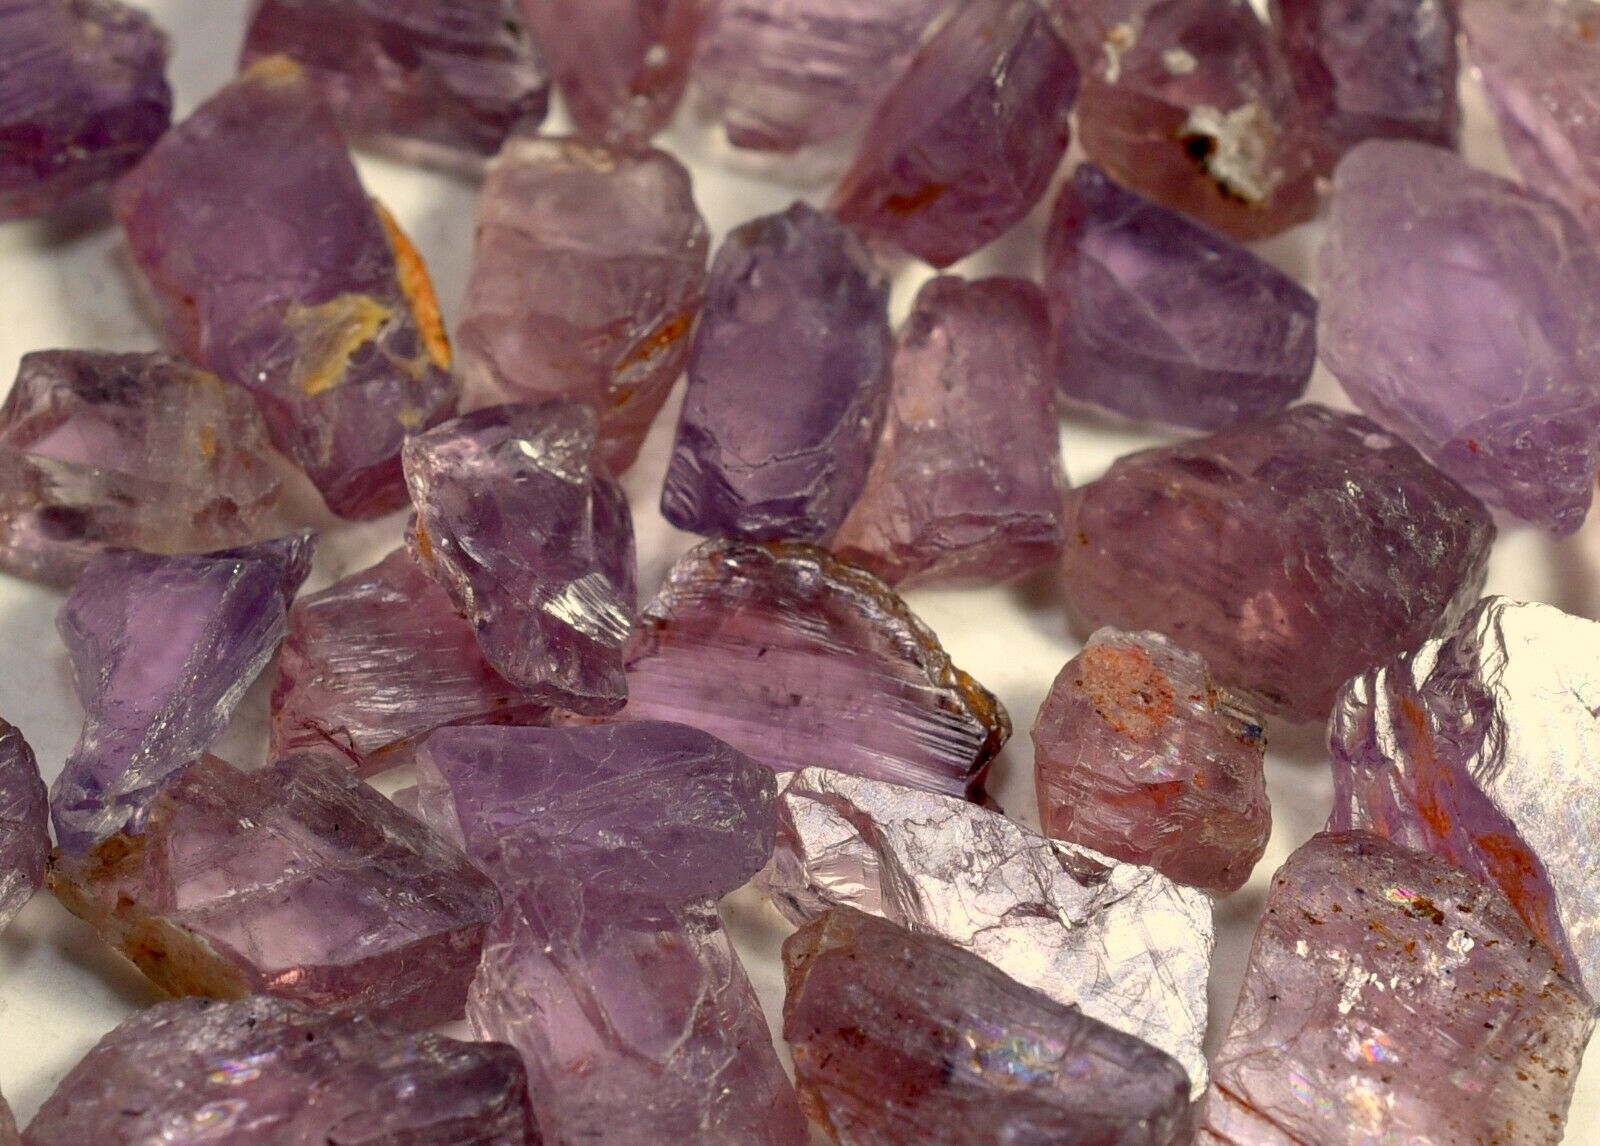 210CT Top Highest Quality Cutting Grade Purple-Pink DIASPORE Crystals Lot Afghan